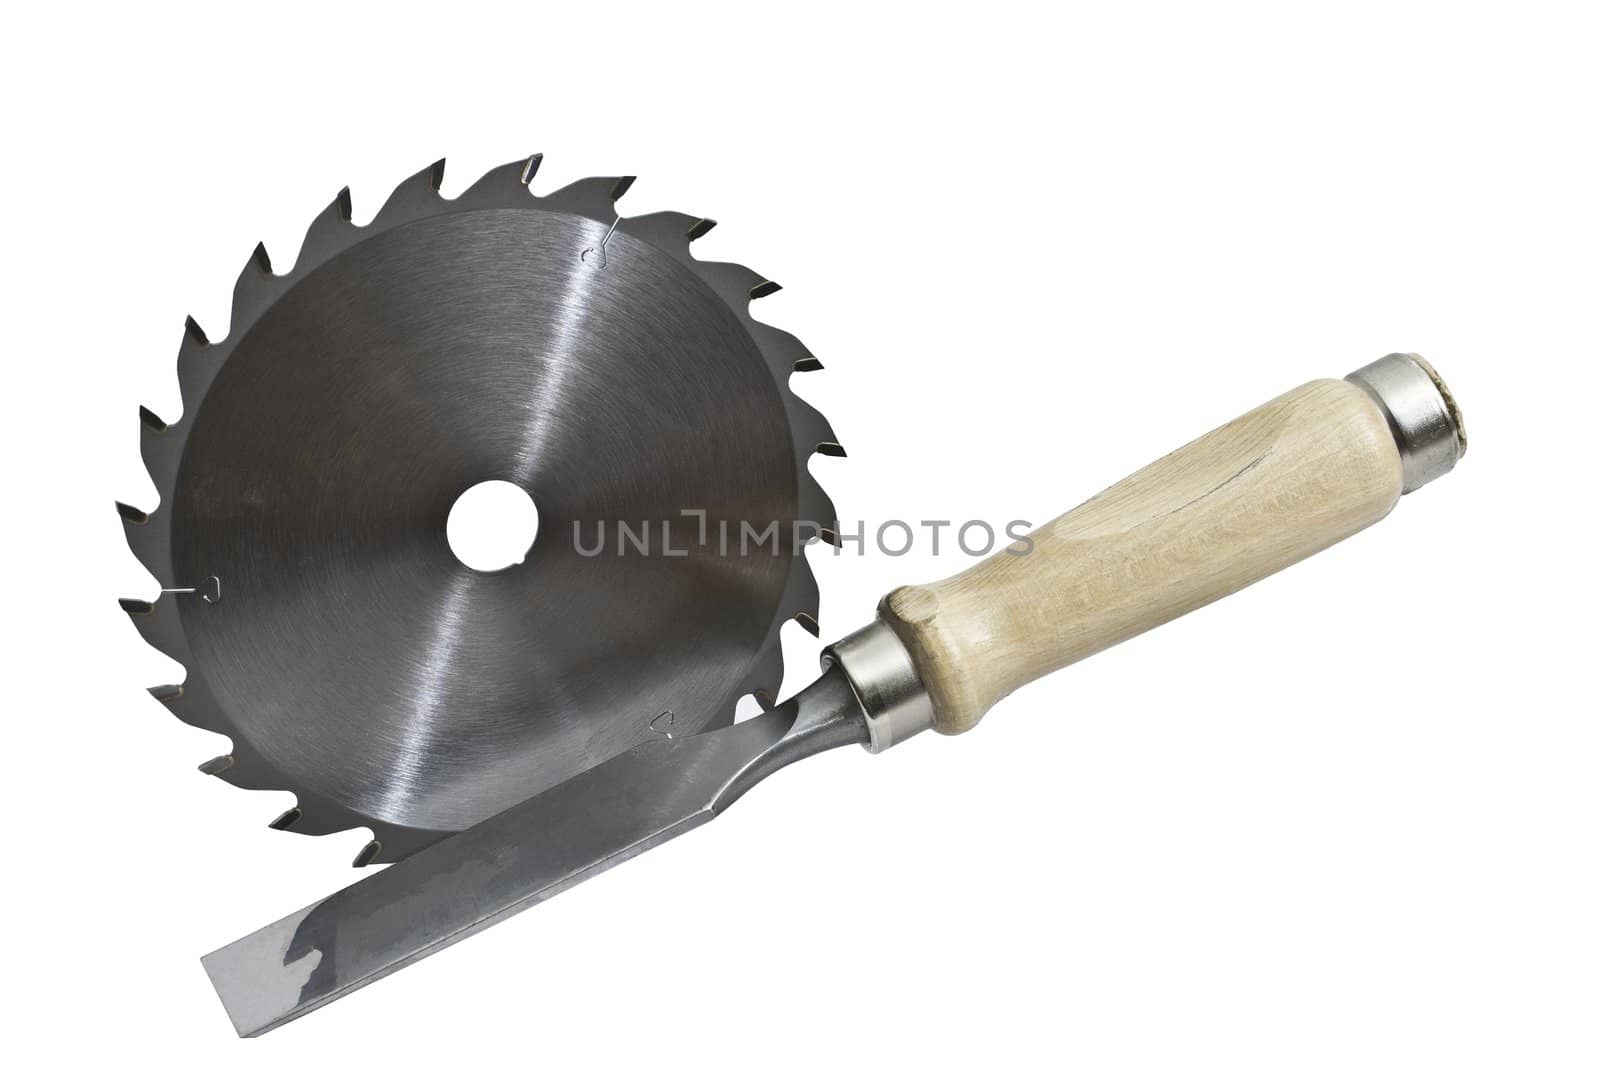 circular saw and broach on white background